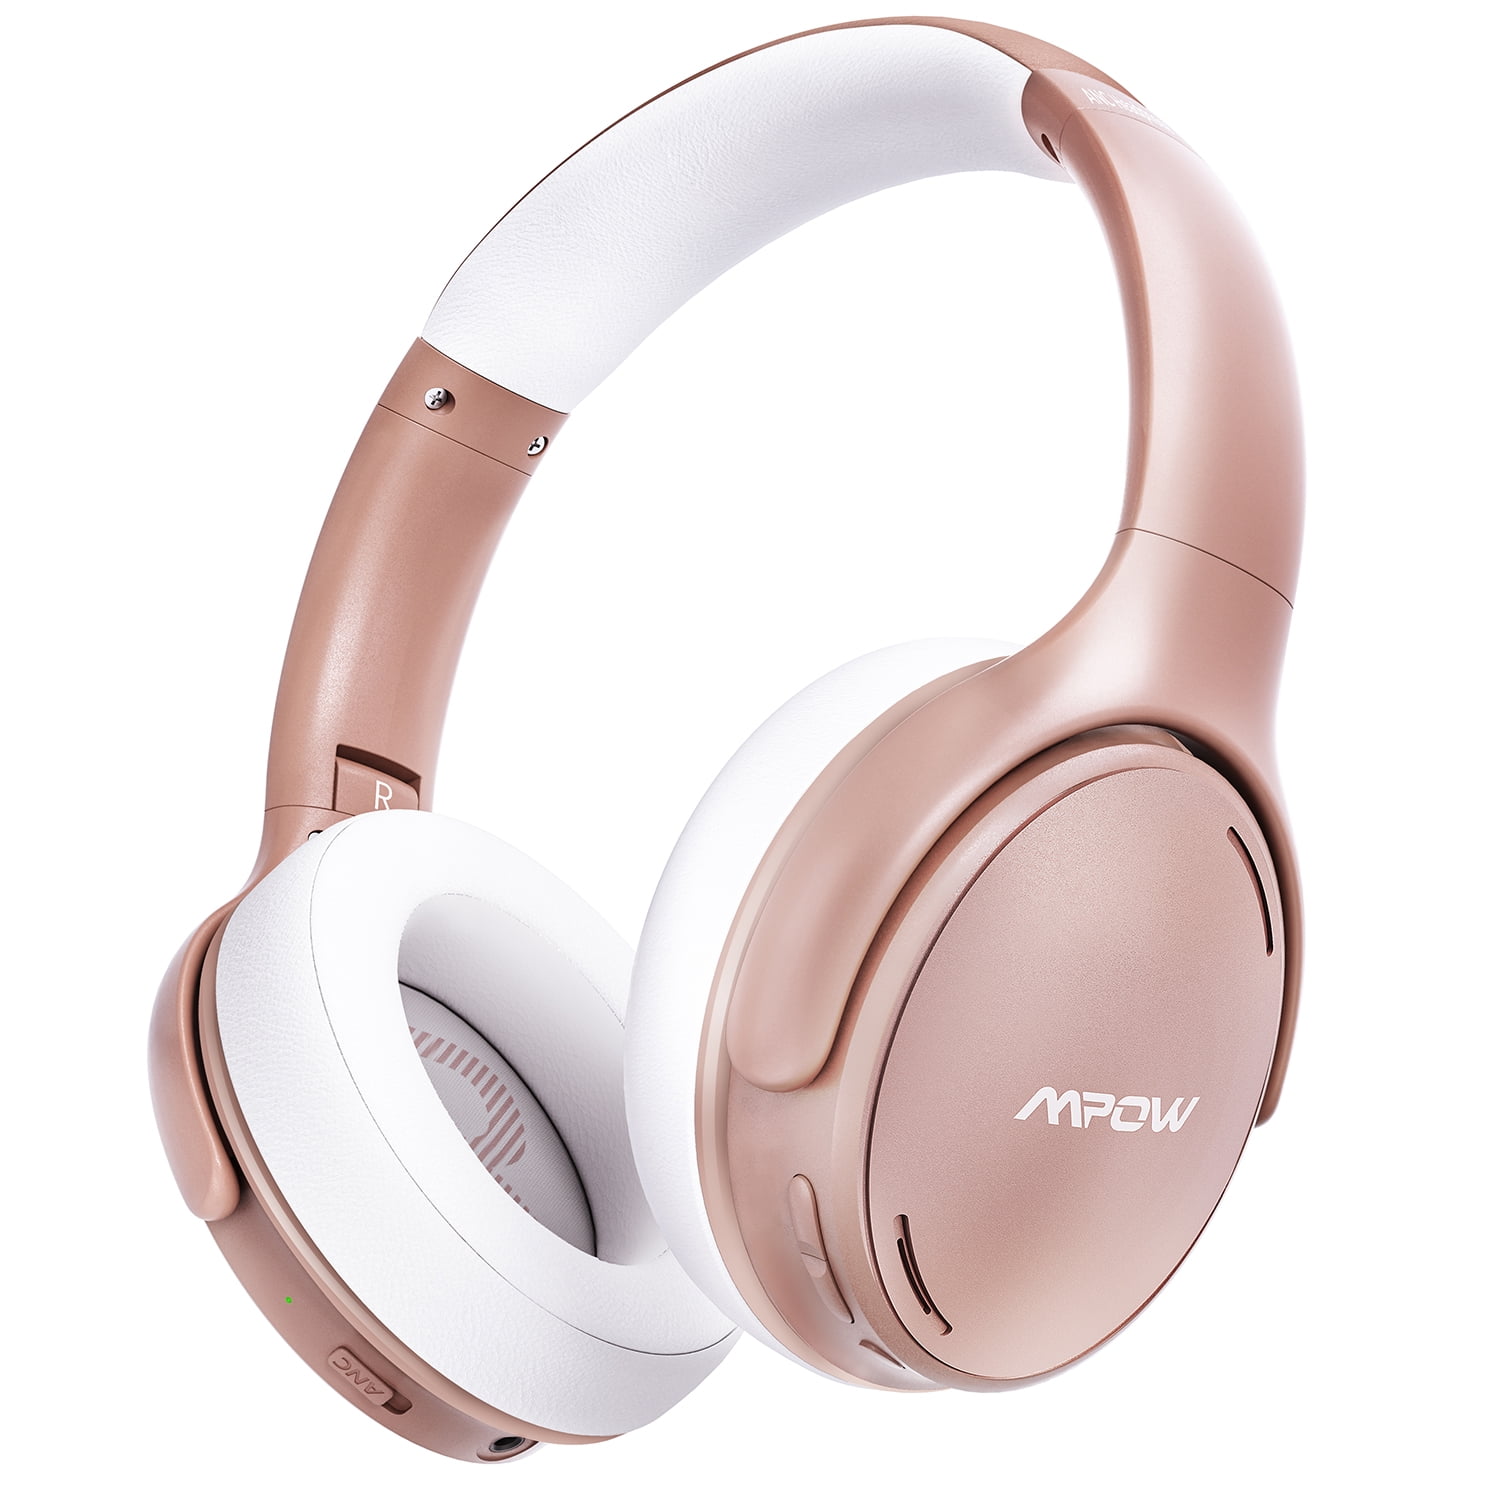 P9 Pro Max Wireless Over Ear Wireless Studio Headphones With Active Noise  Cancelling And HiFi Stereo Sound For Travel And Work From Longweng, $13.27